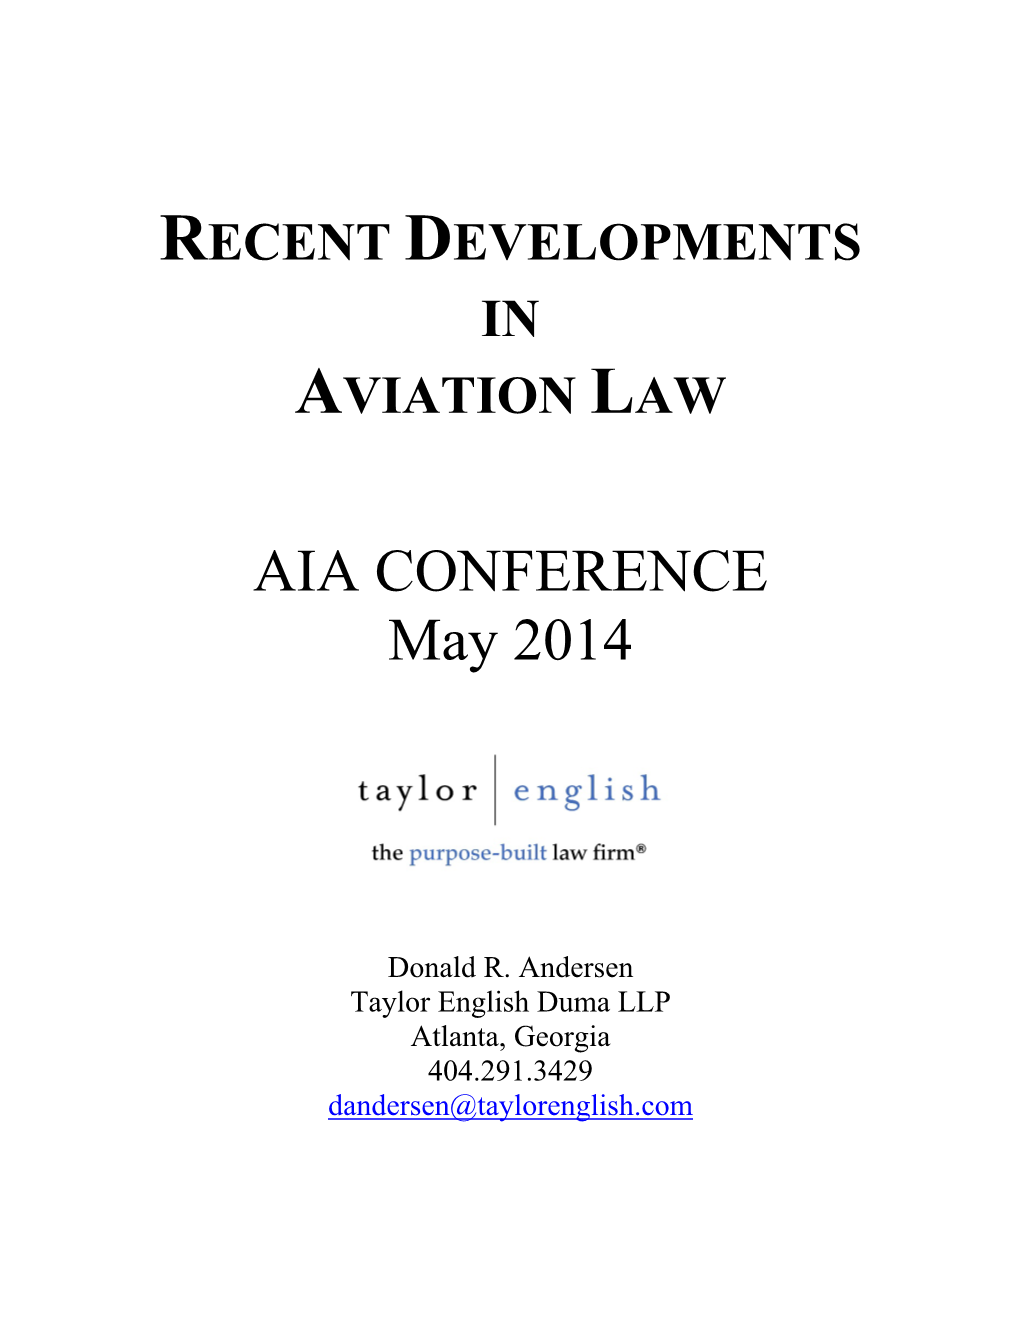 AIA CONFERENCE May 2014